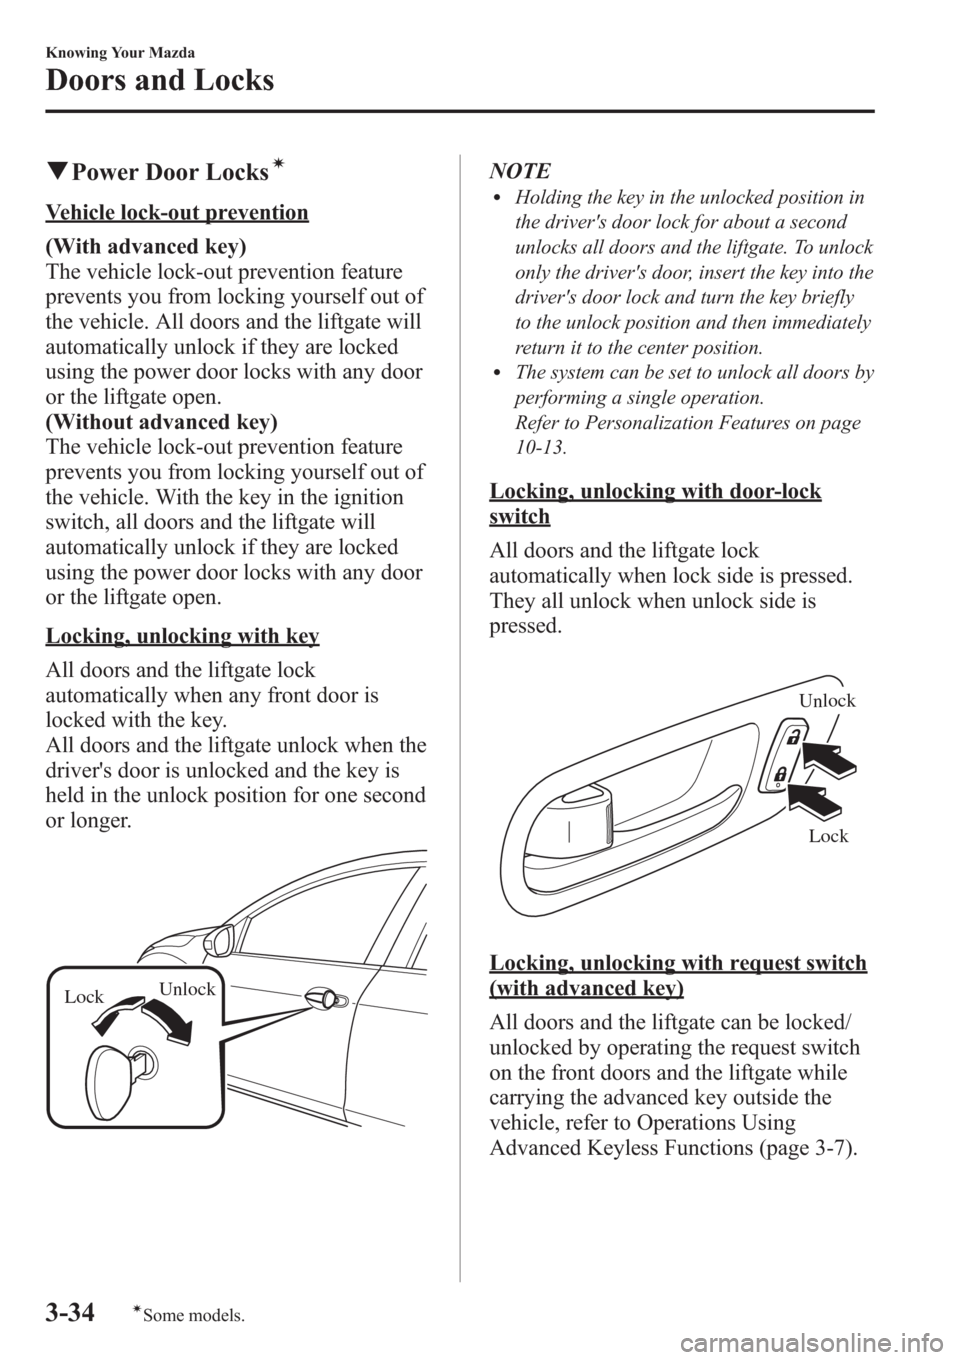 MAZDA MODEL 3 HATCHBACK 2013  Owners Manual (in English) qPower Door Locksí
Vehicle lock-out prevention
(With advanced key)
The vehicle lock-out prevention feature
prevents you from locking yourself out of
the vehicle. All doors and the liftgate will
autom